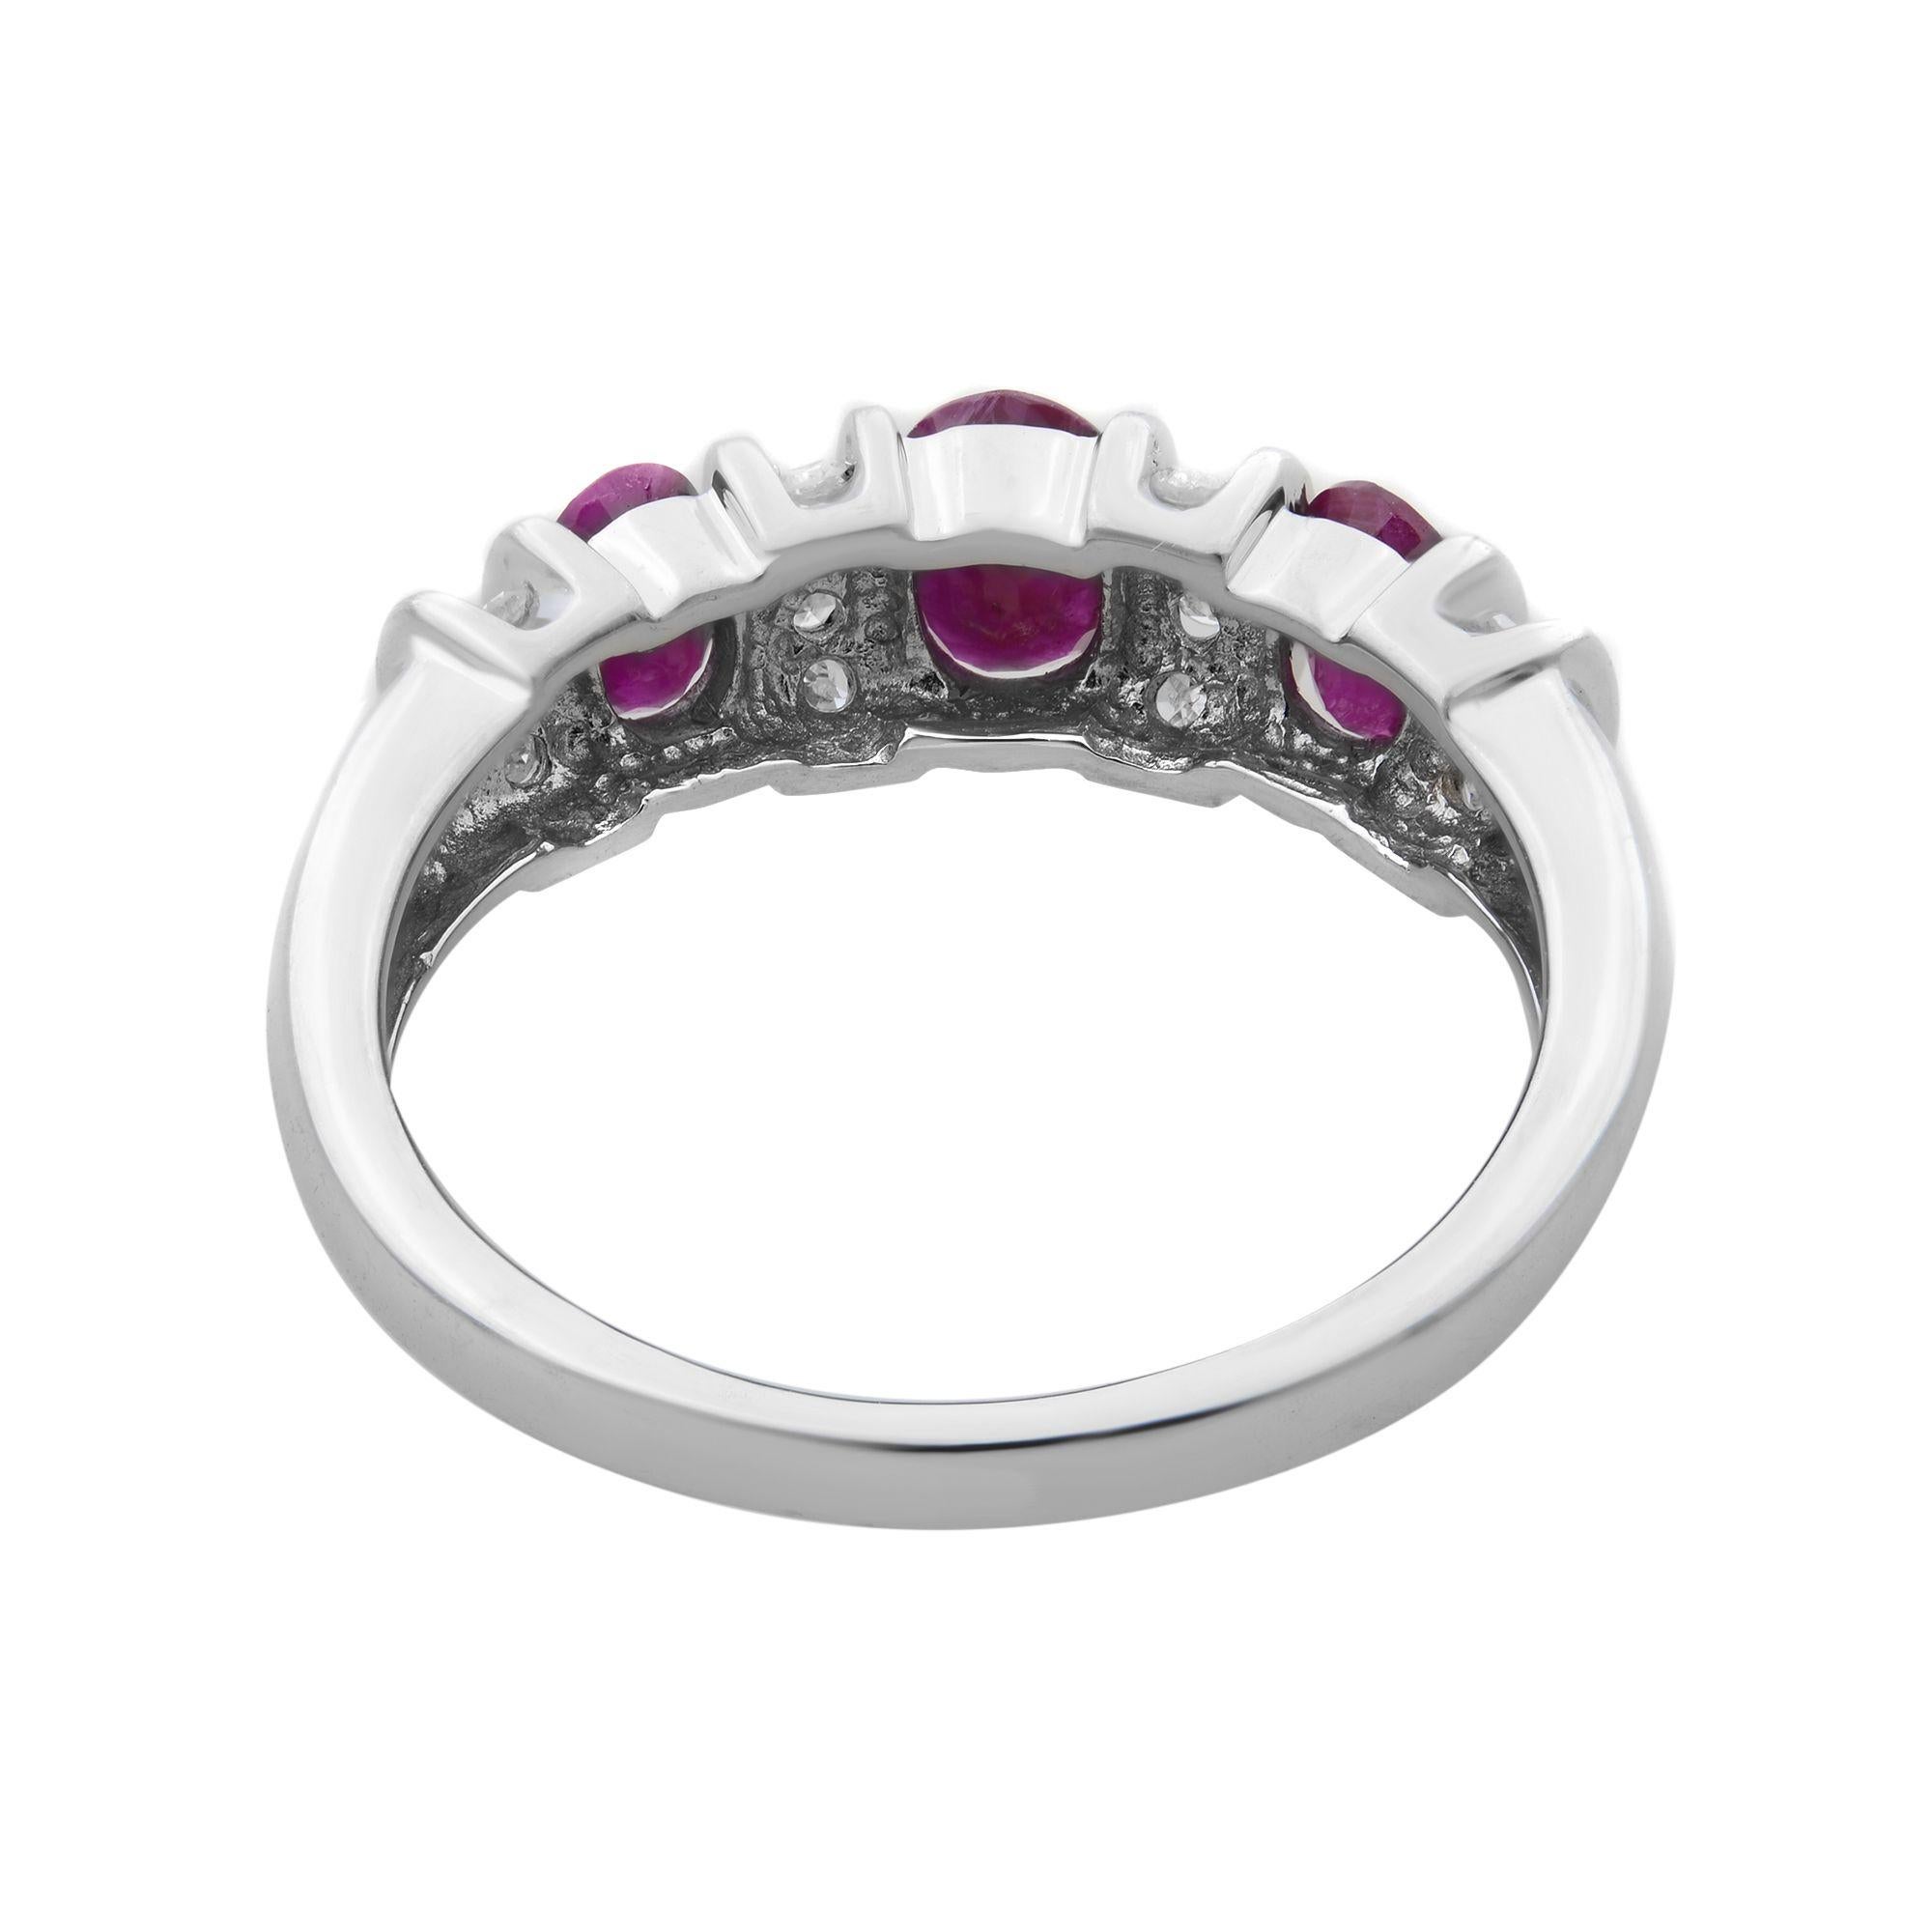 Rachel Koen Ruby 0.75cttw Diamond 0.17cttw Cocktail Ring 14K White Gold SZ7 In New Condition For Sale In New York, NY